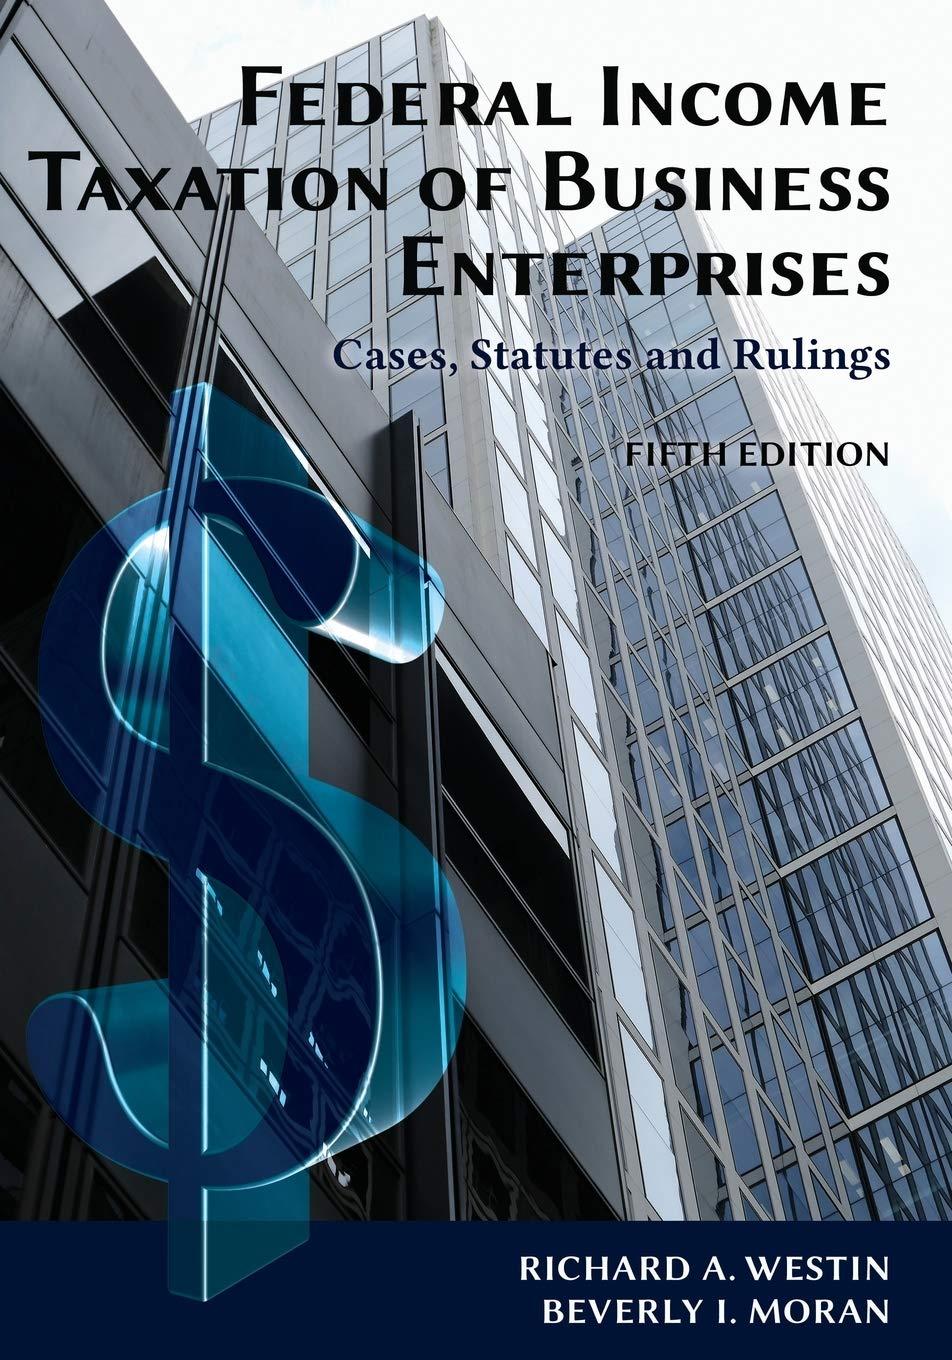 federal income taxation of business enterprises cases statutes and rulings 5th edition richard a. westin,